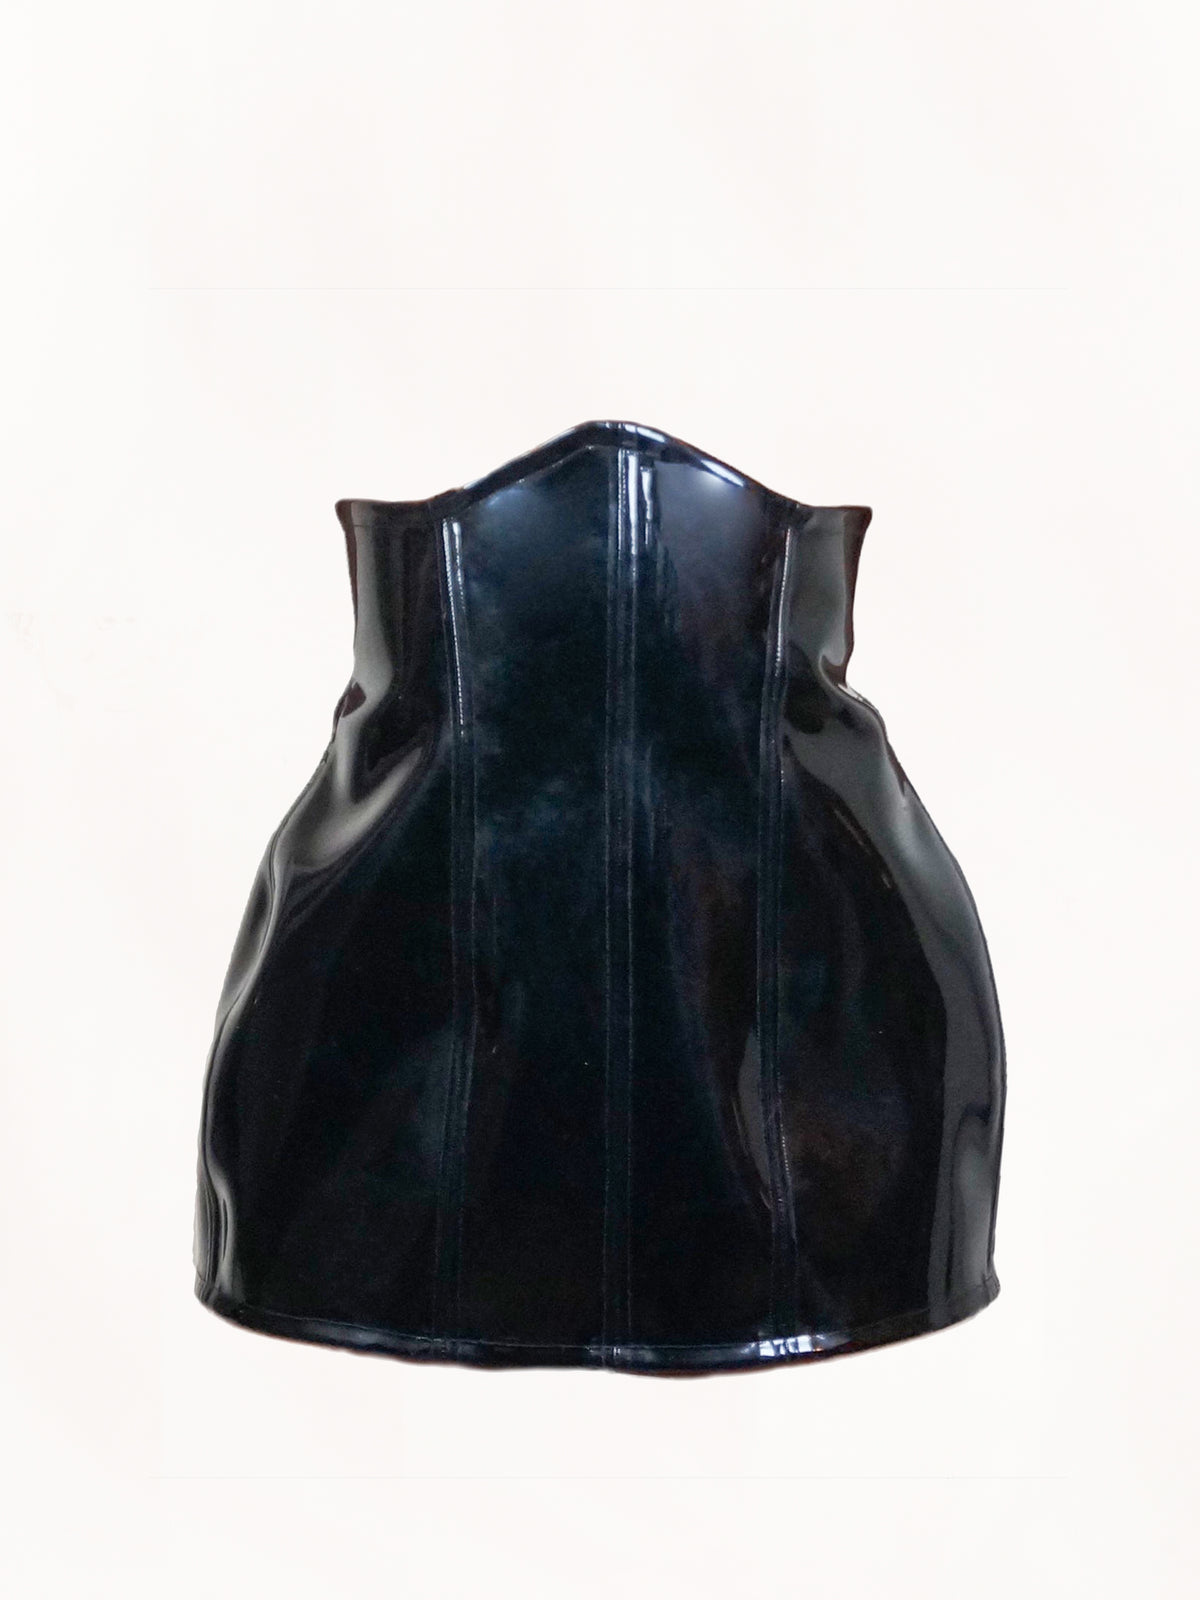 Corset Skirt - Color Black by GrayScale Made in Downtown Los Angeles